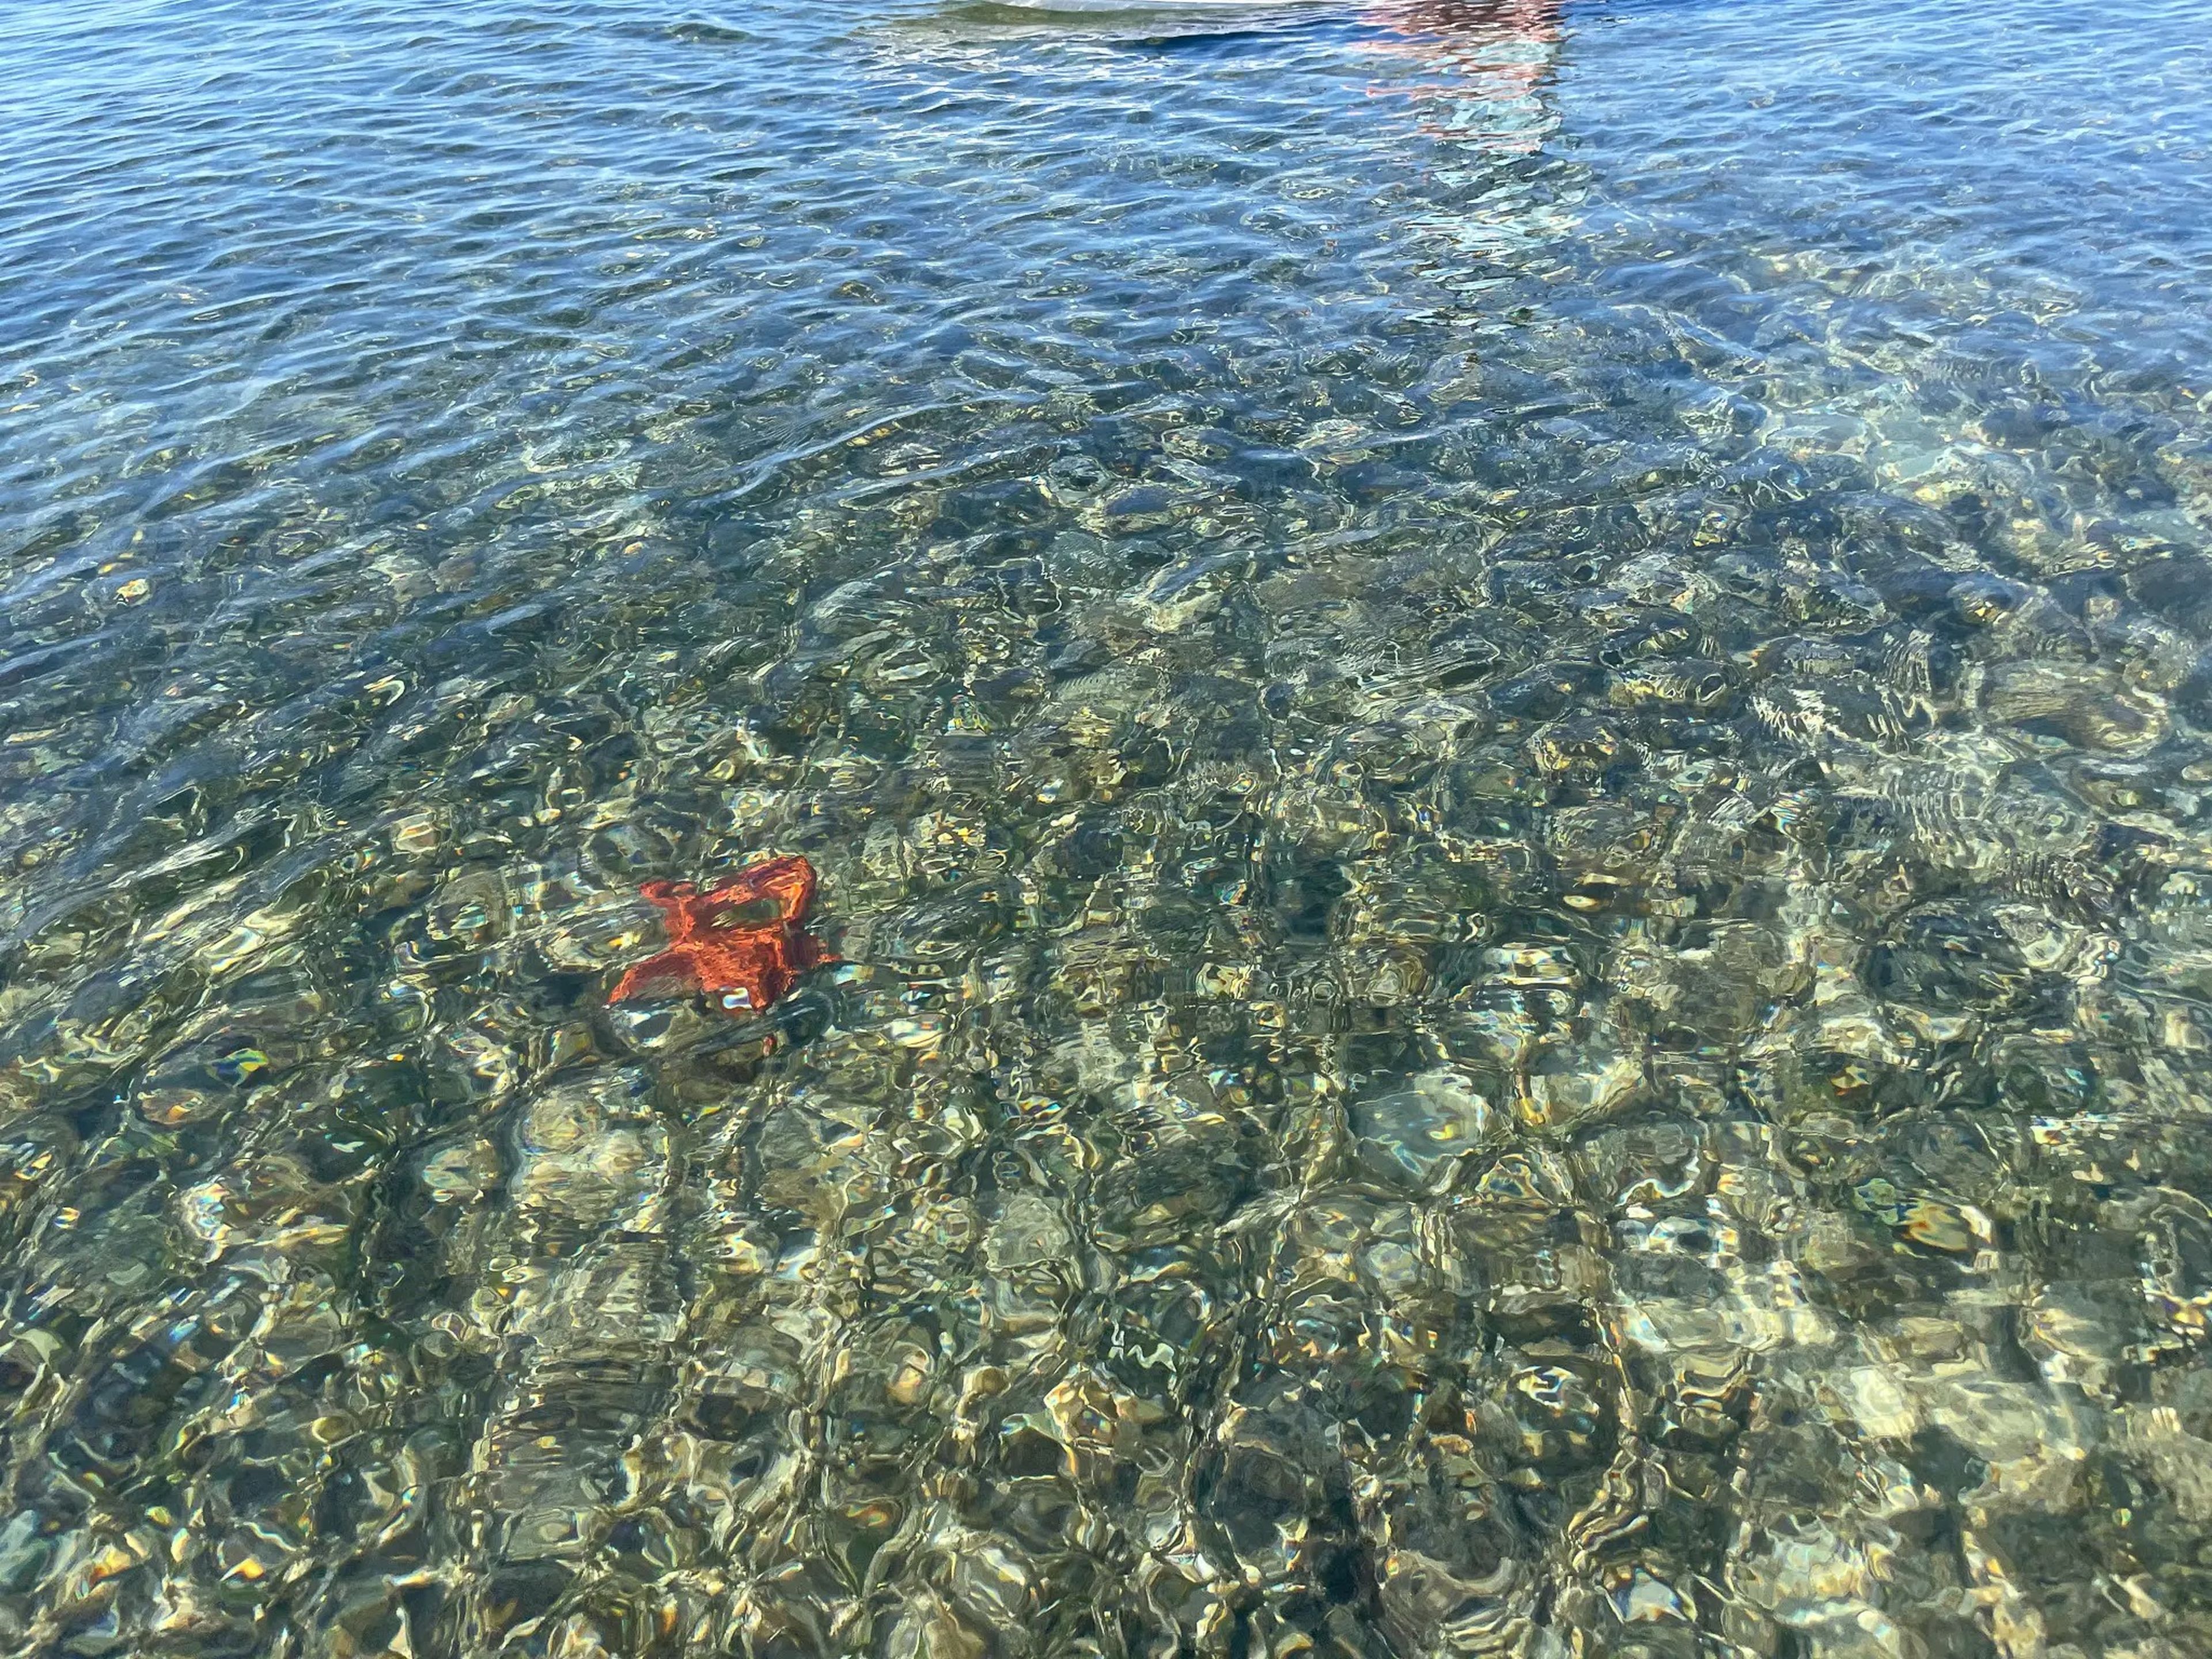 A starfish in the water at Thatch Caye.